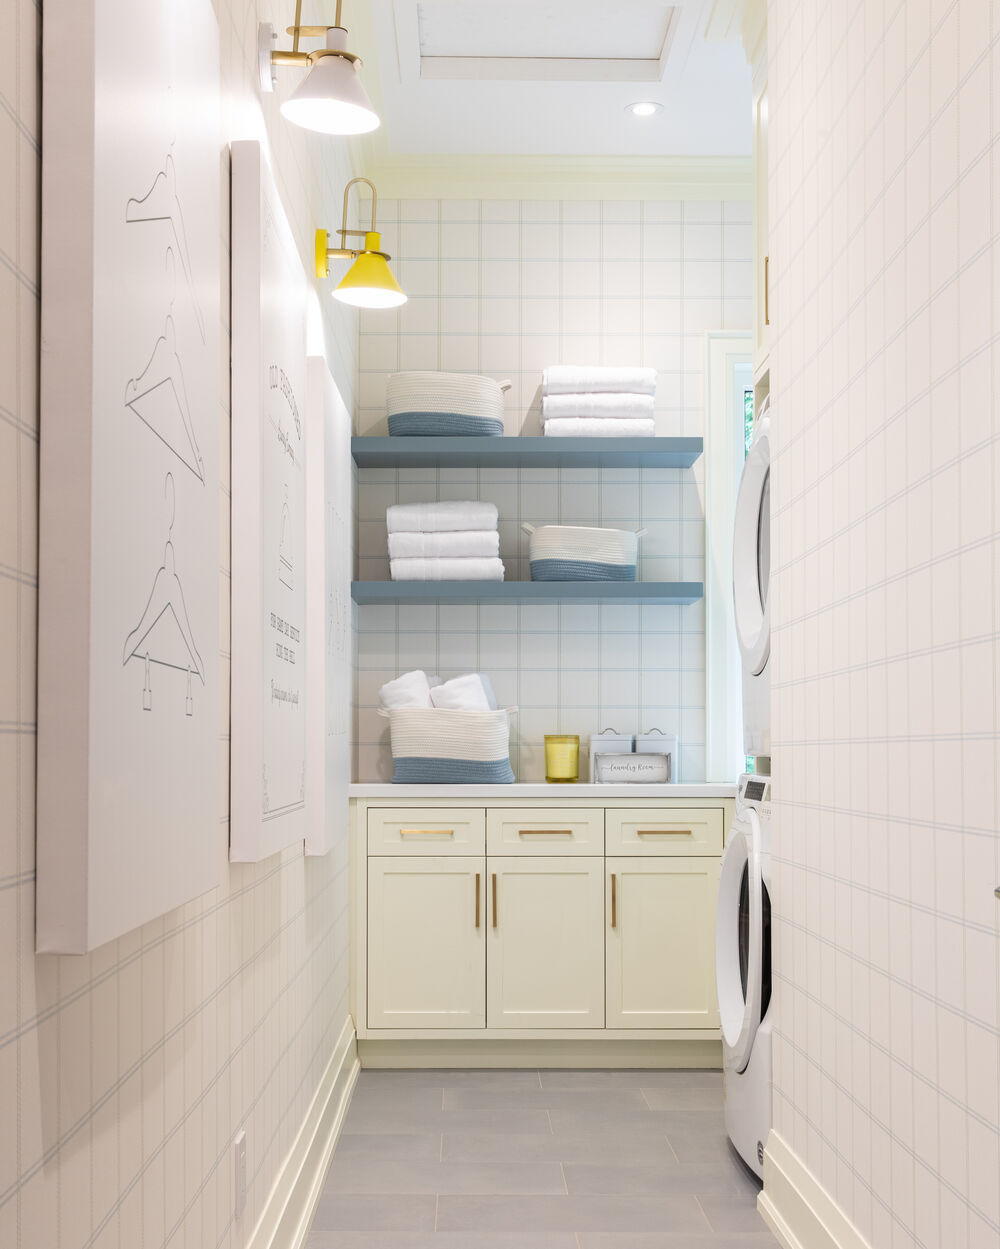 Laundry room design ideas with colour